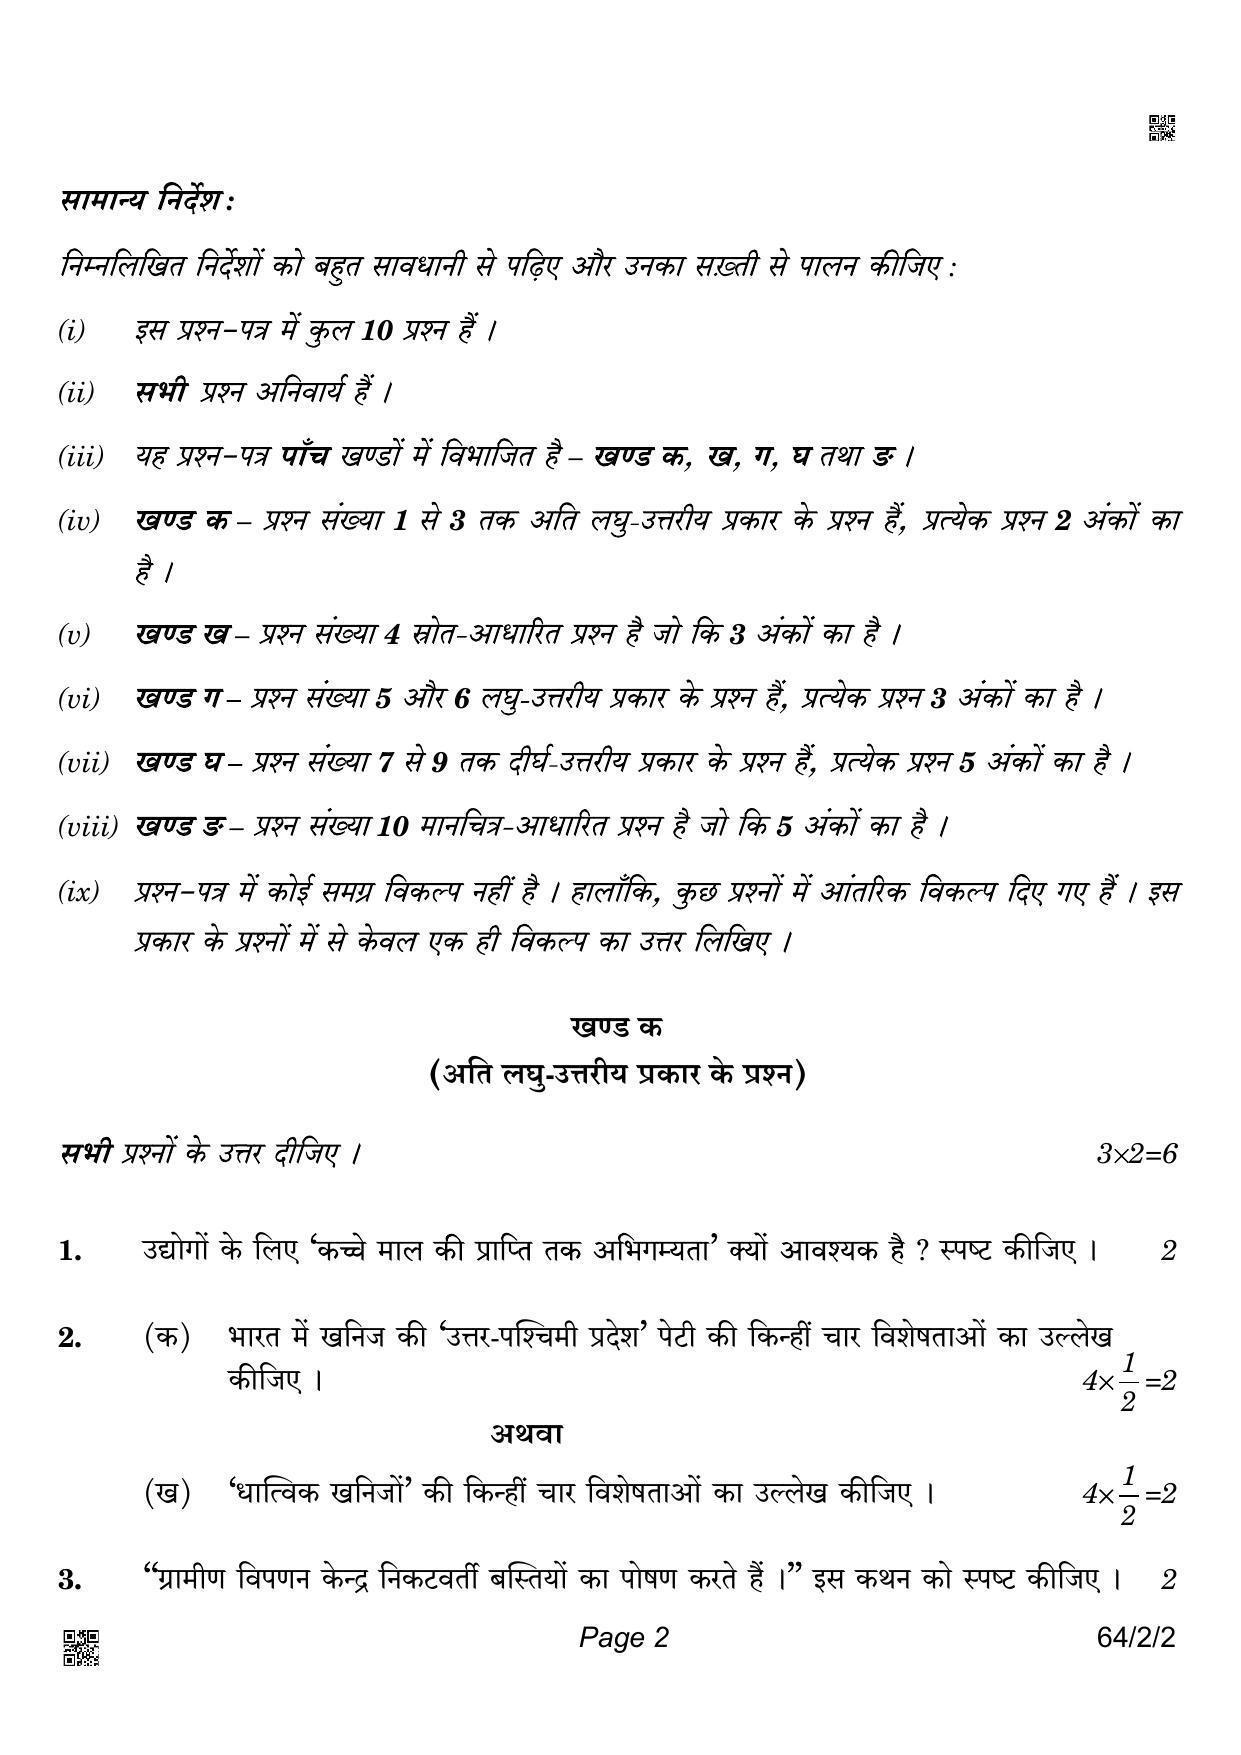 CBSE Class 12 64-2-2 Geography 2022 Question Paper - Page 2